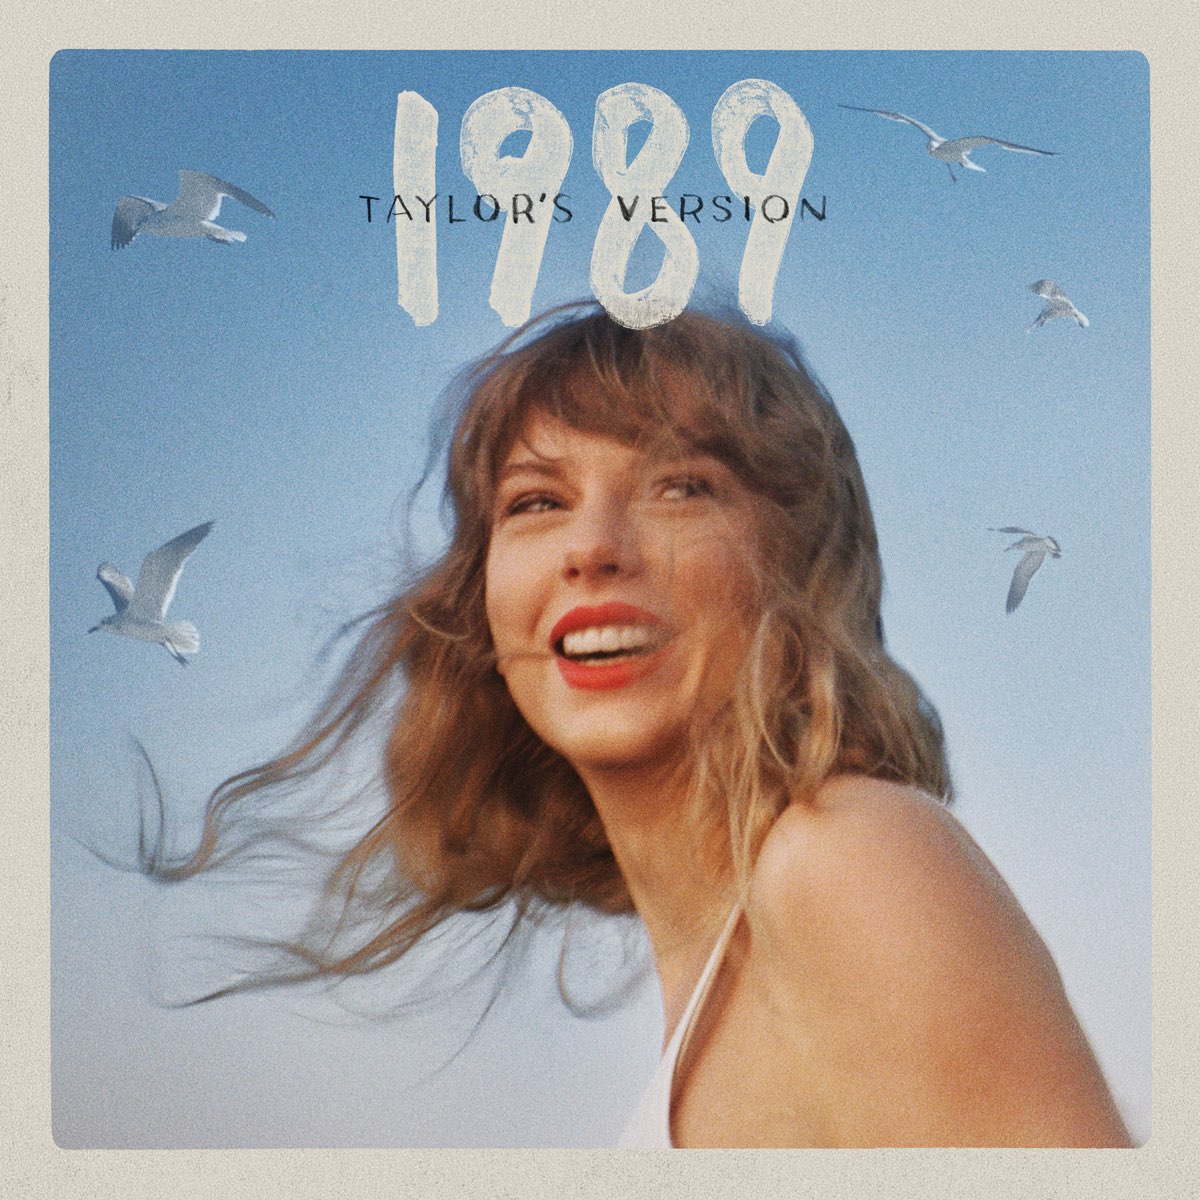 1989 (Taylors Version) allows Swift to reclaim her 2014 hit album. 